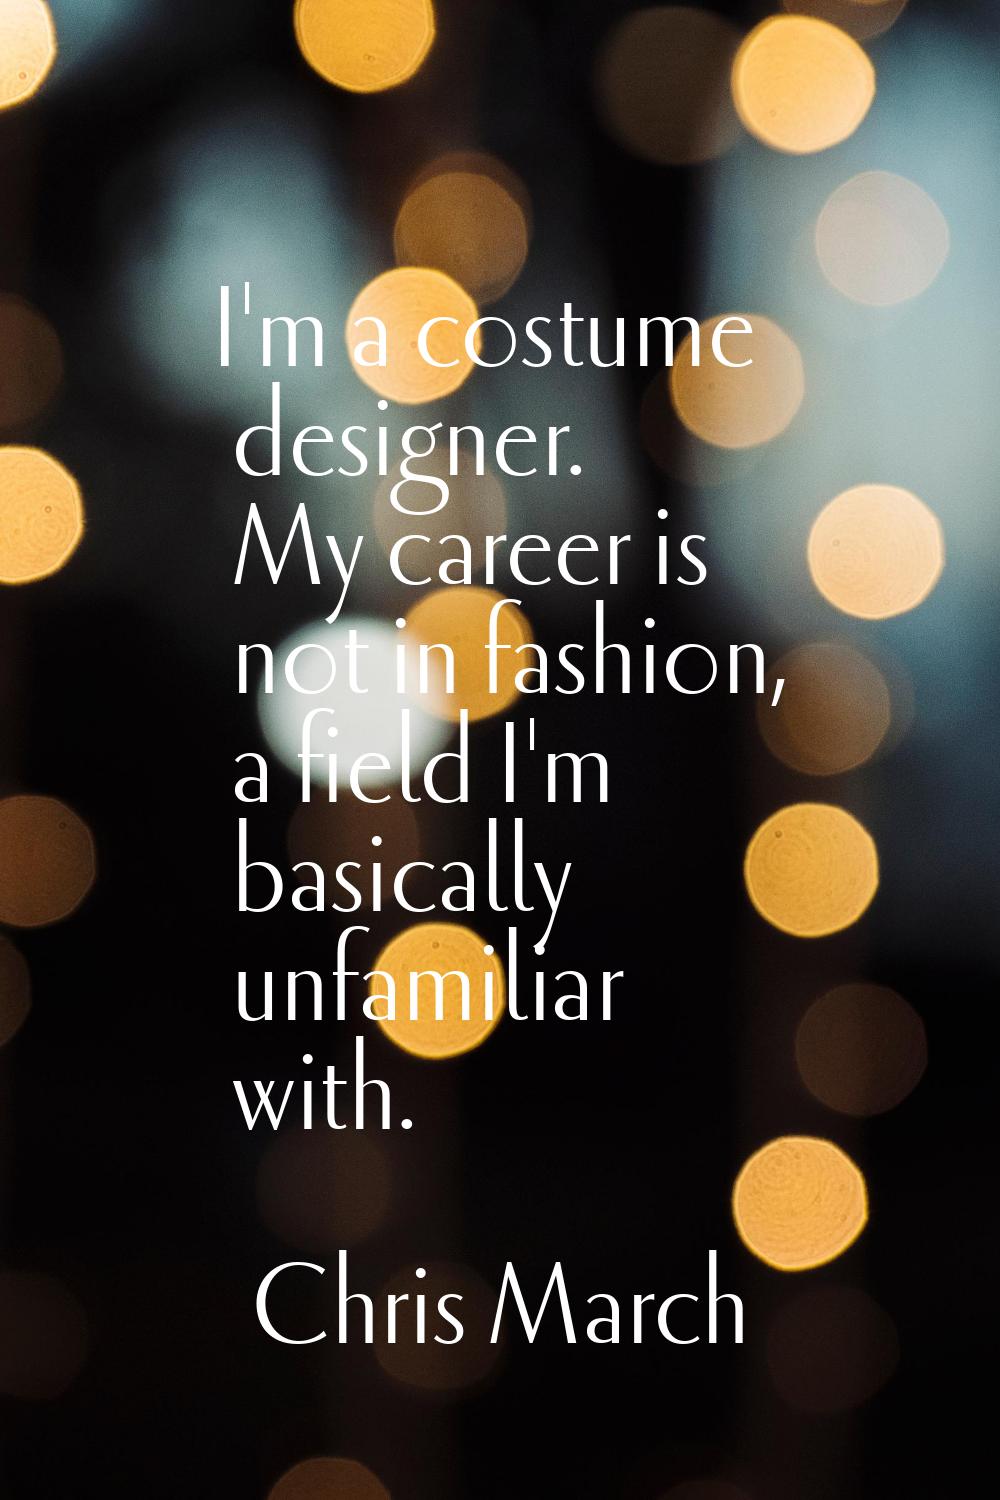 I'm a costume designer. My career is not in fashion, a field I'm basically unfamiliar with.